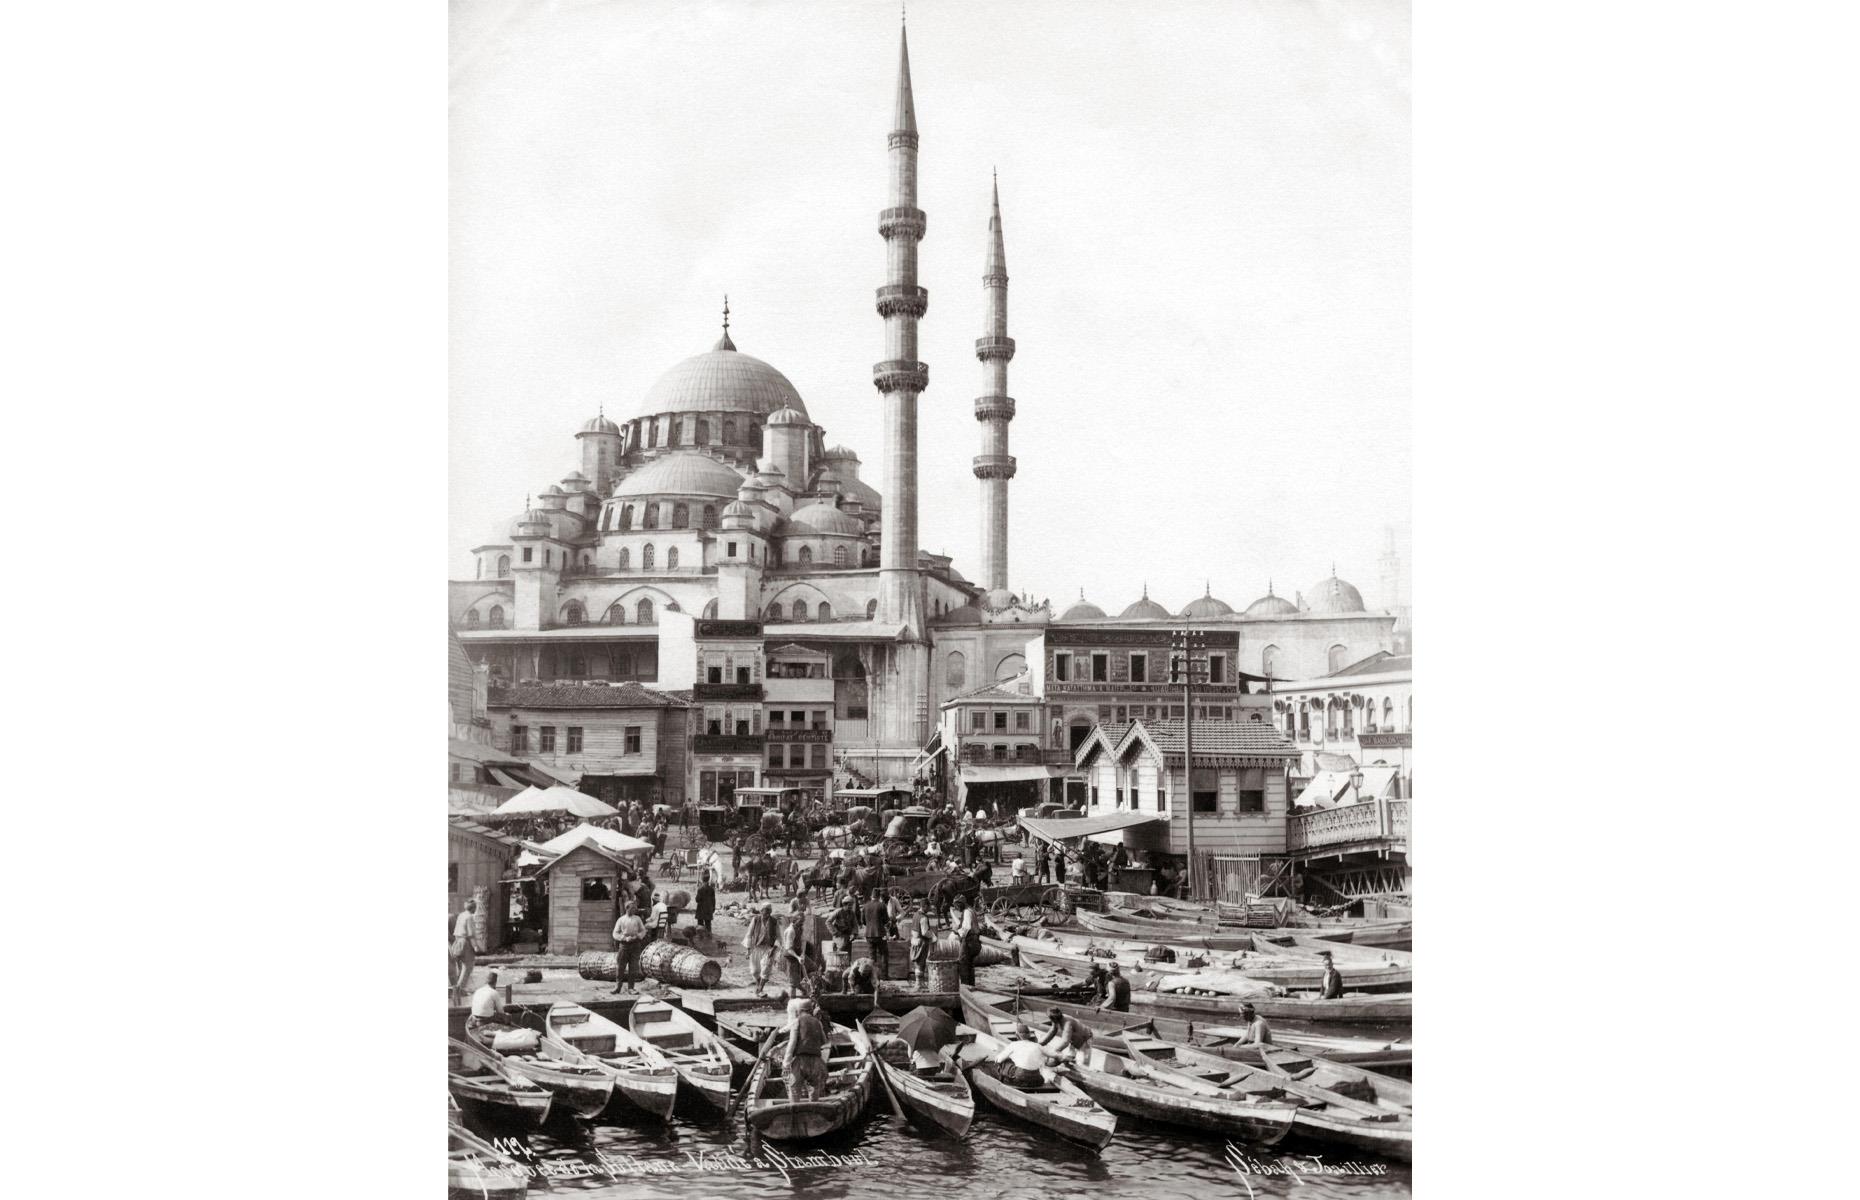 <p>Chaotic and intoxicating Istanbul straddles Europe and Asia and is an exotic melting pot where East meets West. It has always been that way, as we see from this photo taken around 1895. Boatmen gather in the shadow of the city’s iconic Hagia Sophia mosque to transport people and goods across from one continent to the other, a journey made so much easier today after the Bosphorus Bridge was opened in 1973.</p>